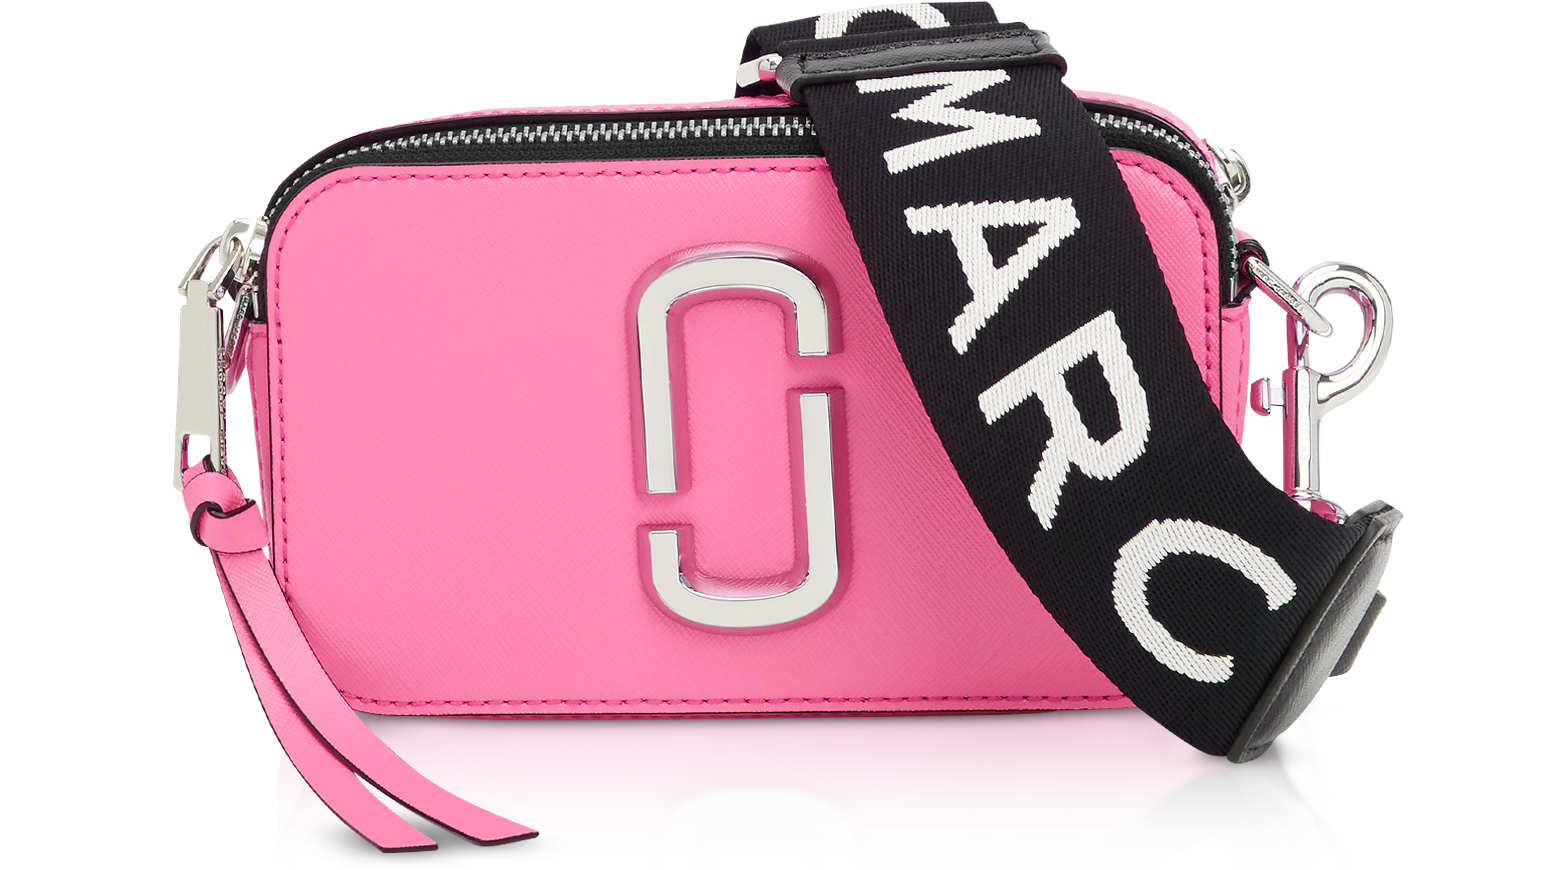 The Marc Jacobs The Fluorescent Snapshot Hot Pink in Saffiano